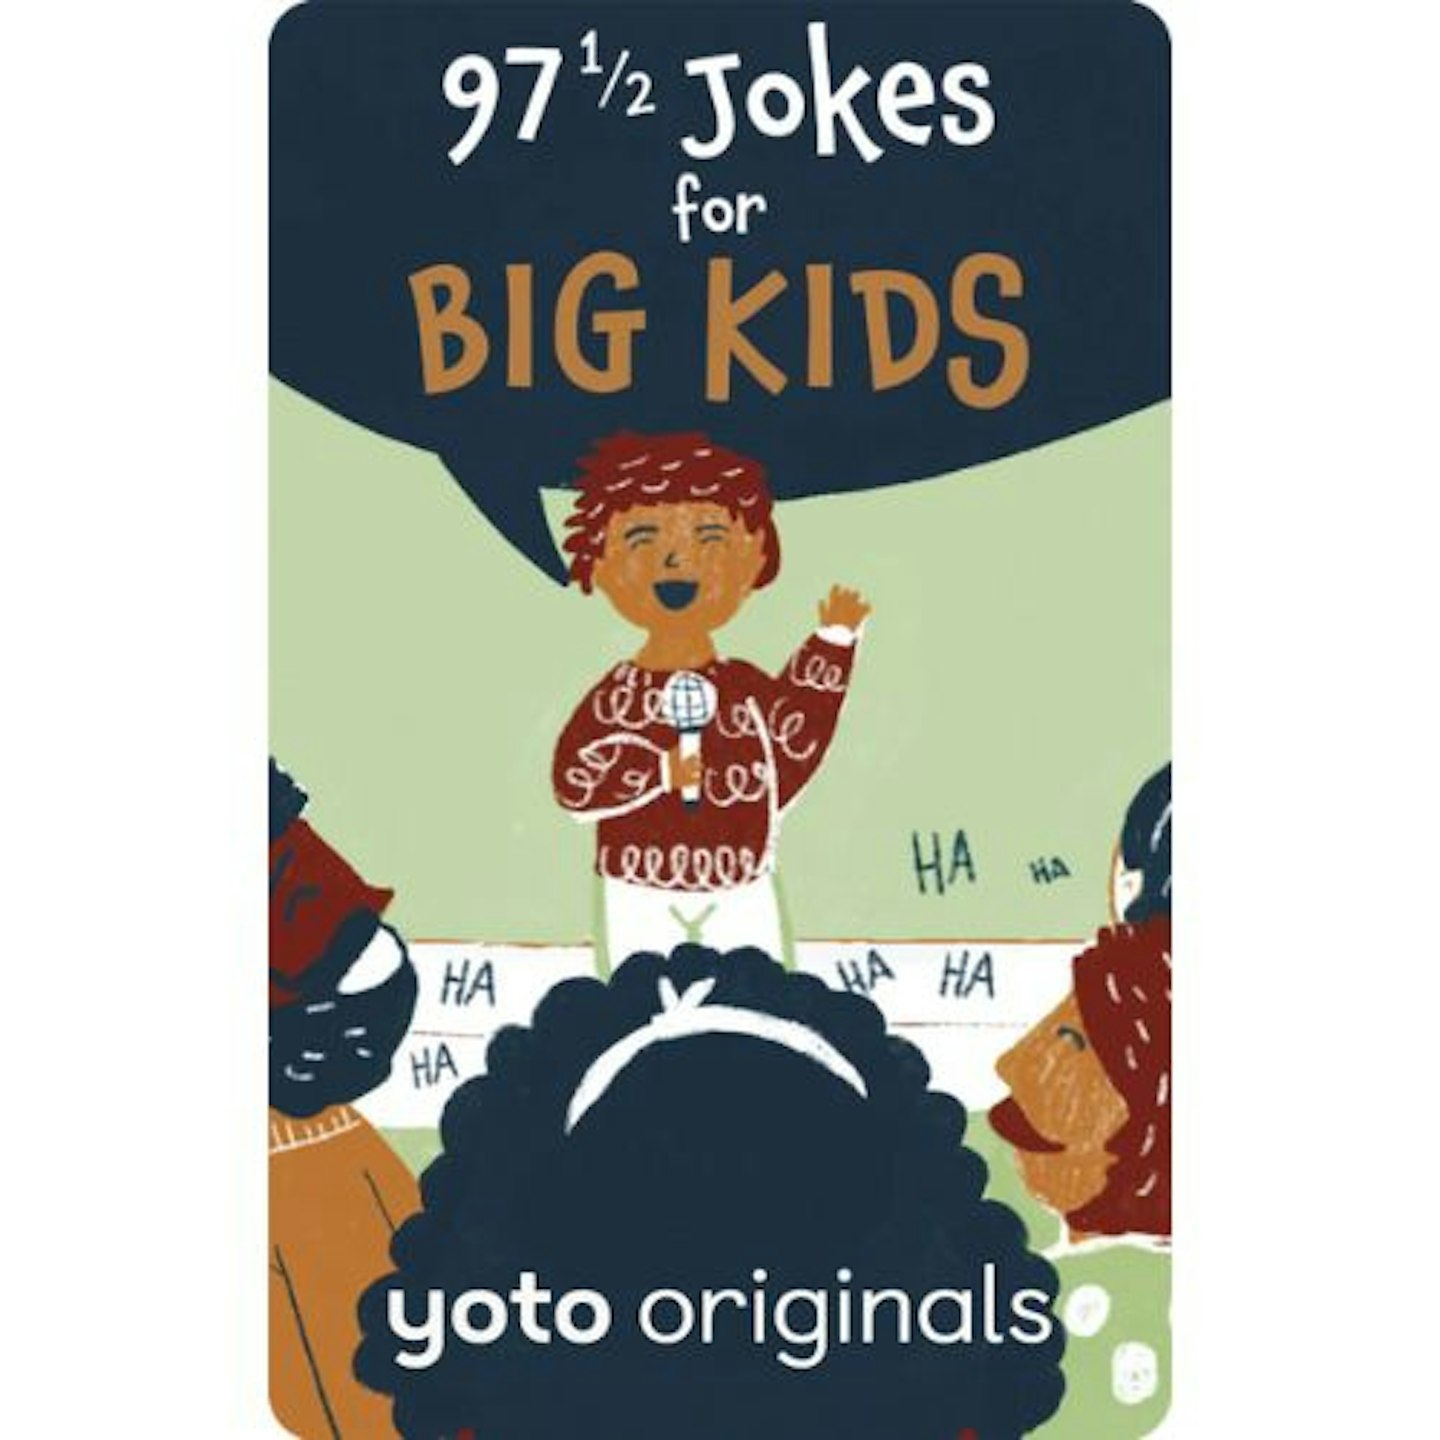 Best Yoto Player story cards 97 1/2 Jokes for Big Kids